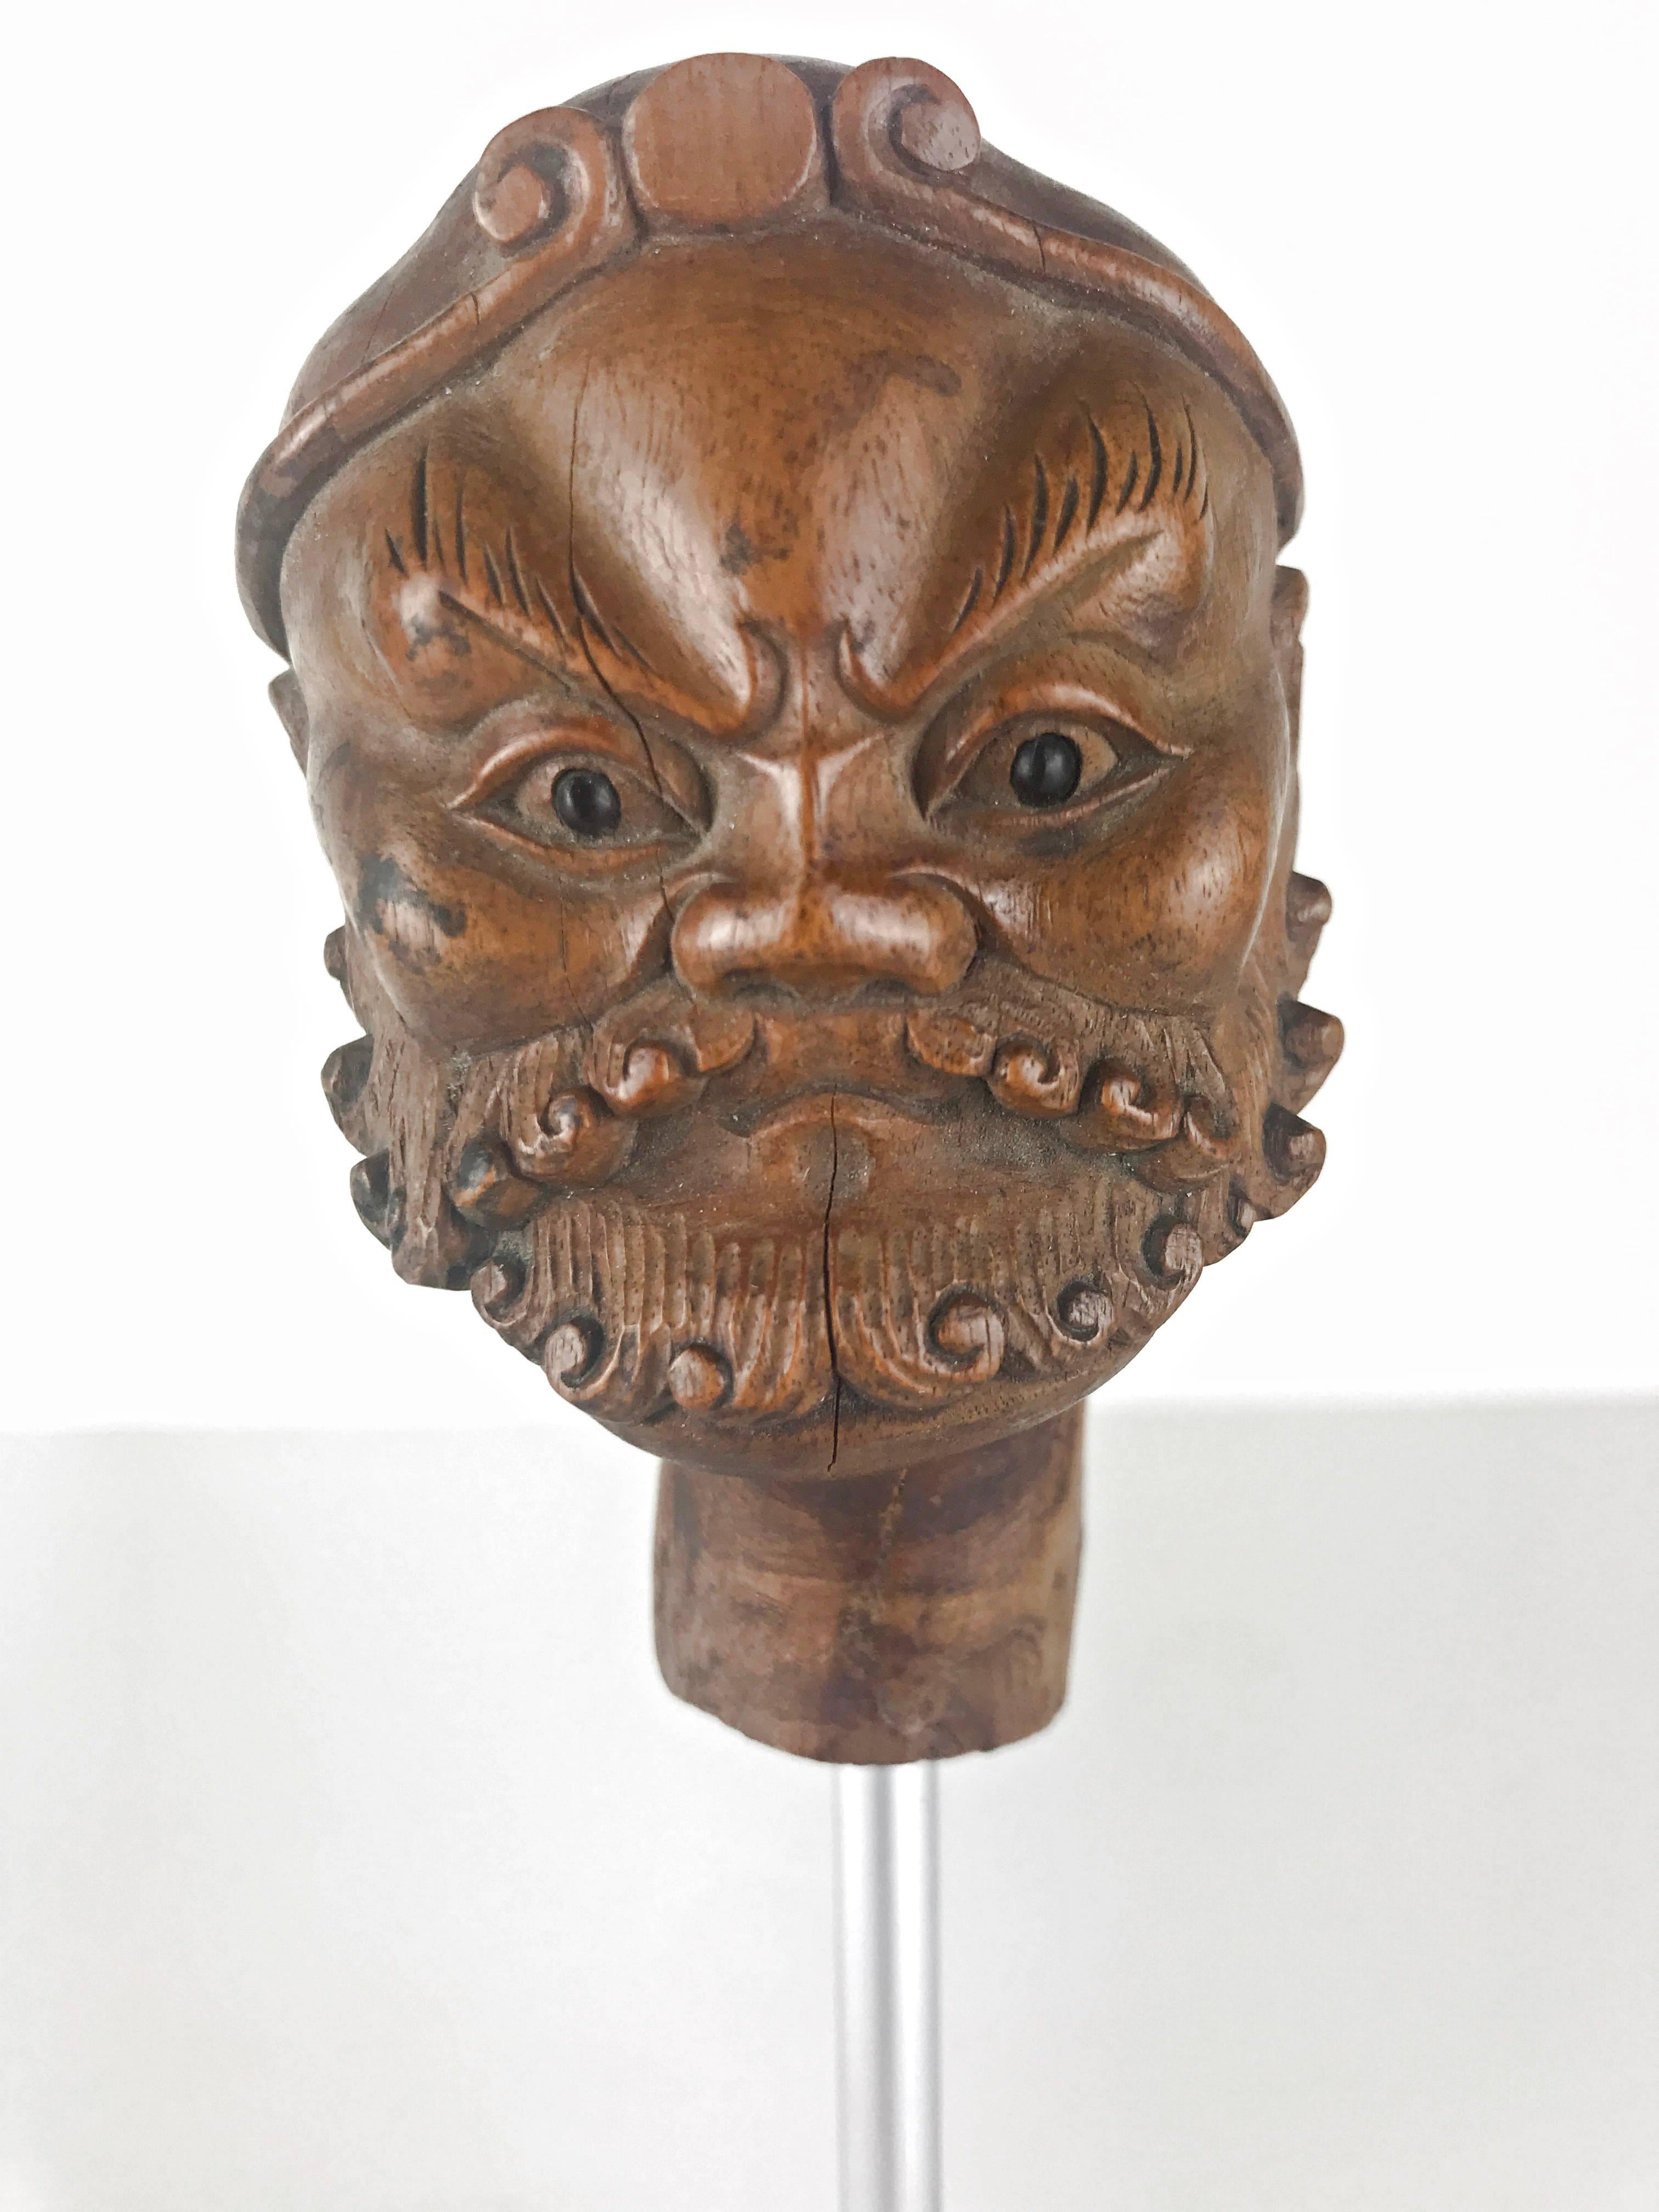 Fine carved Chinese head puppet in the form of a Buddhist arhatt mounted on a wooden base, 19th century.
Size with base is 7.5 inch (19 cm) high.